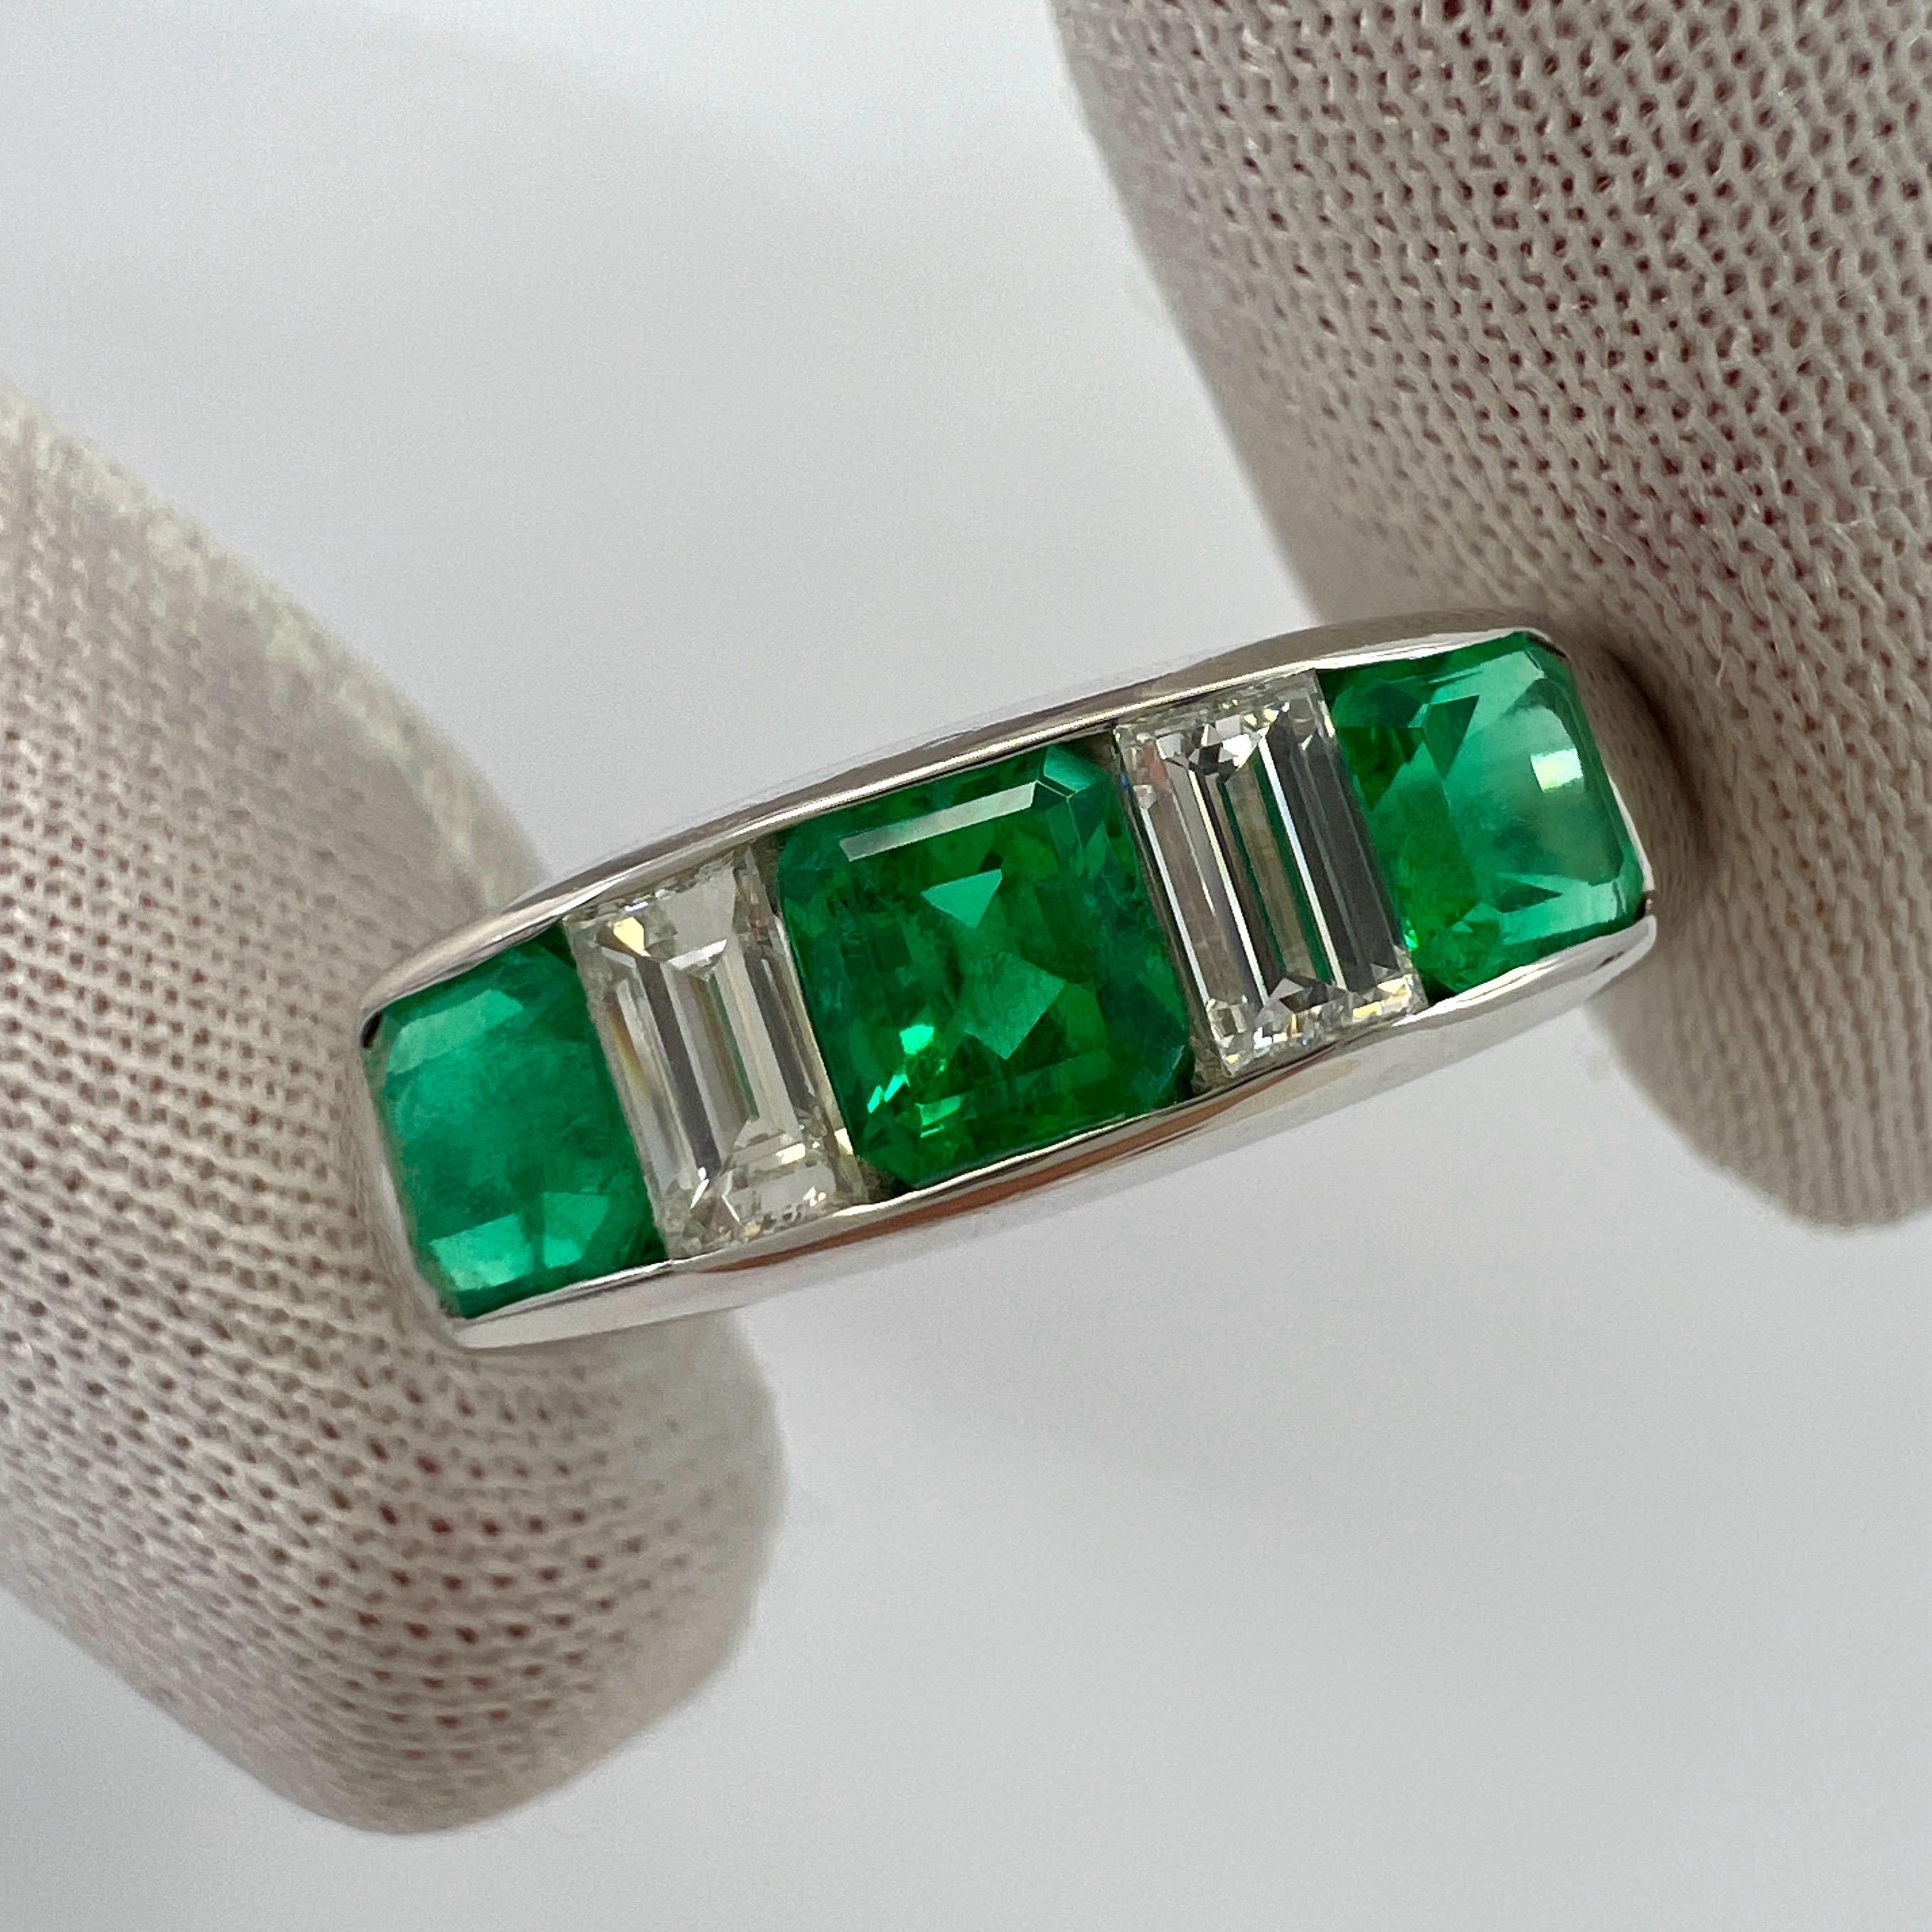 Fine Vivid Green Colombian Emerald & Diamond 900 Platinum Five Stone Band Ring.

Total carat weight 1.39 carat. 
Featuring three stunning Colombian emeralds with a fine vivid green colour and excellent square emerald cuts. 1.01 carat total.
These